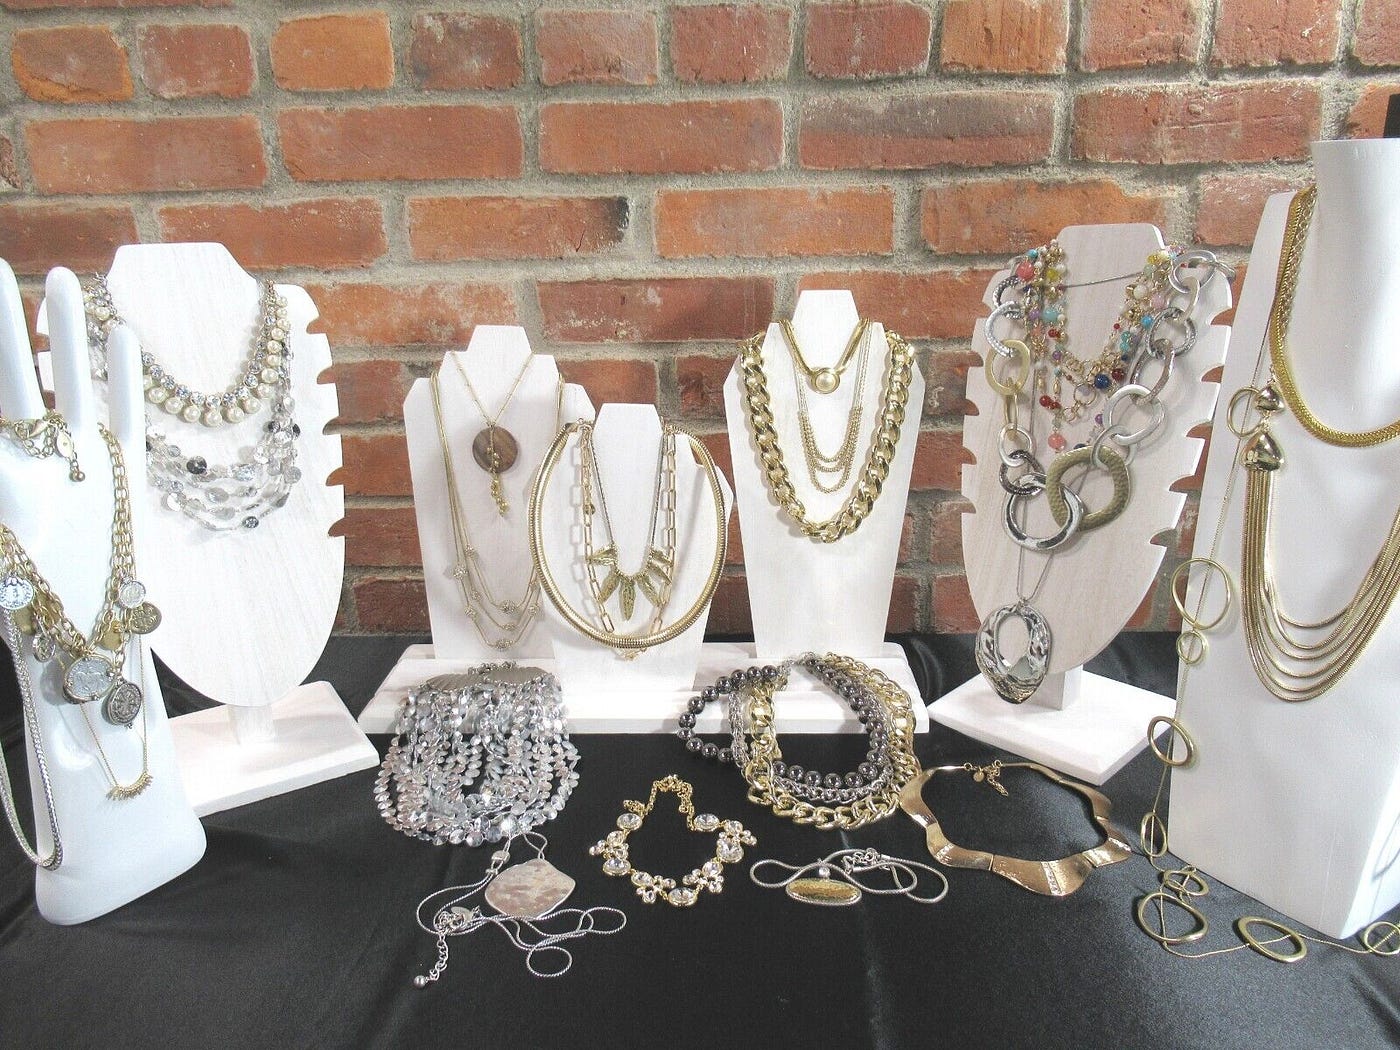 Top 10 Wholesale Jewelry Vendors in New York | by Lianner Bardell | Medium